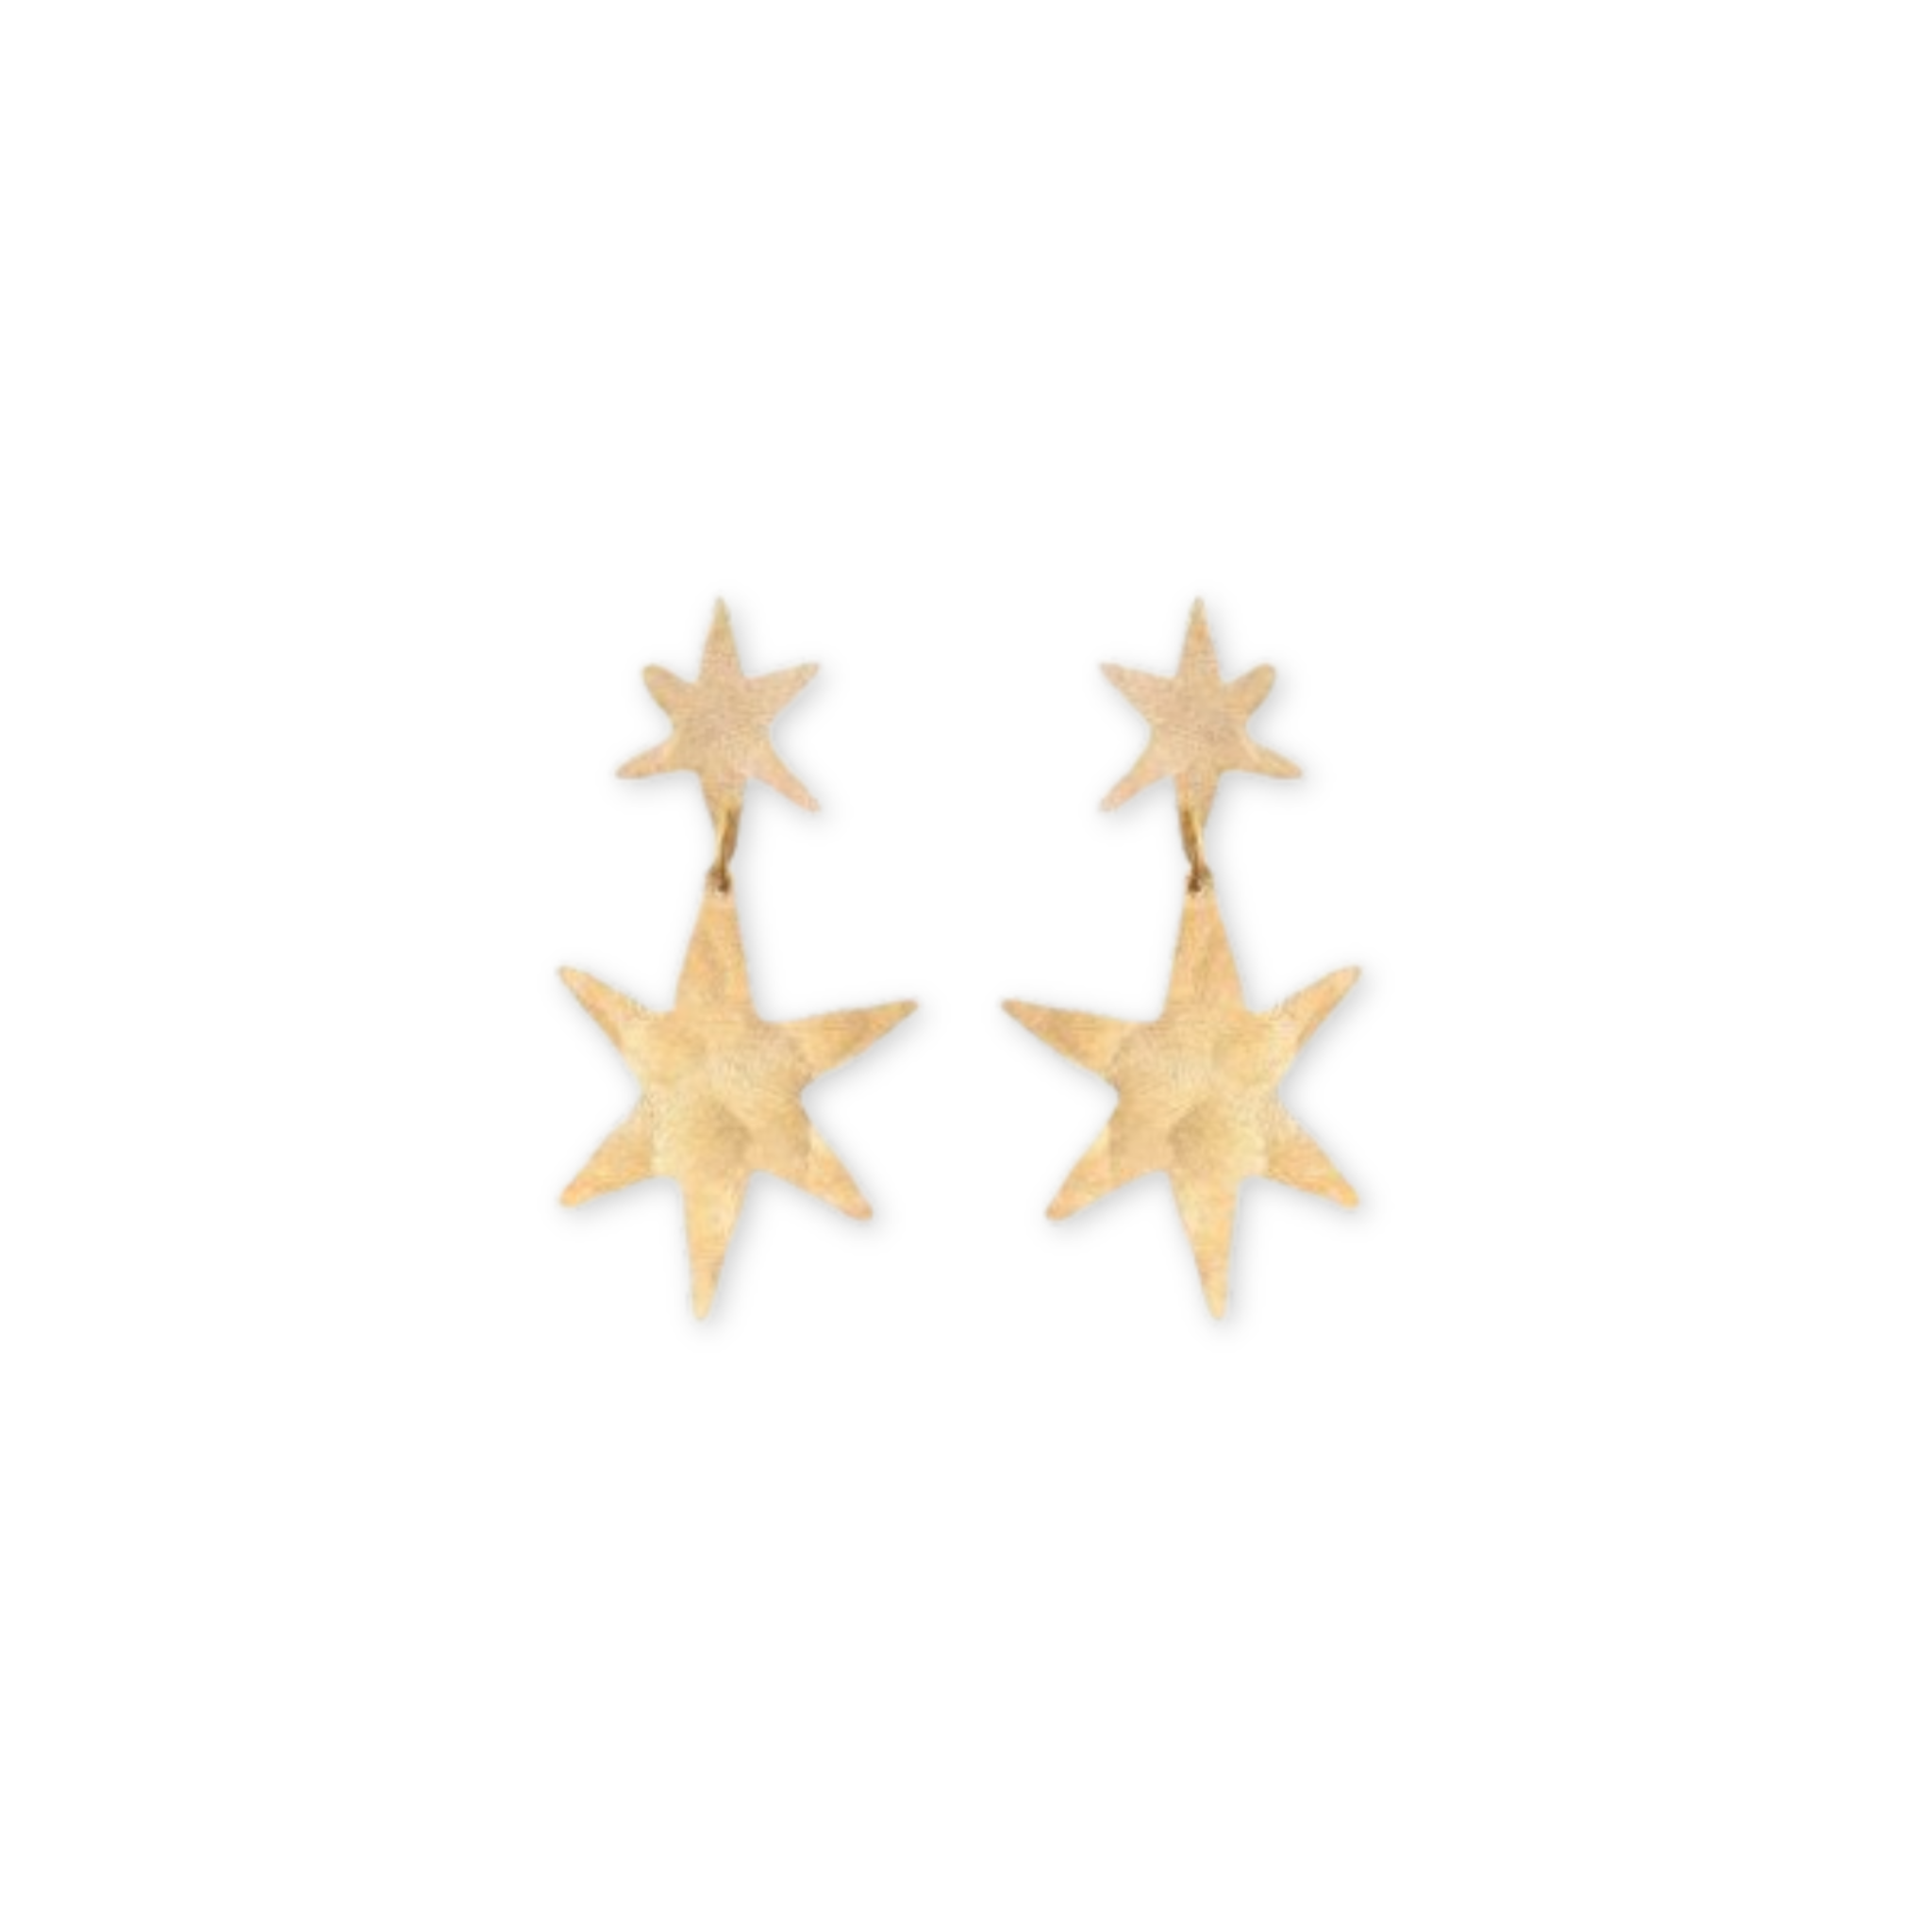 hammered earrings with two hanging six pointed stars